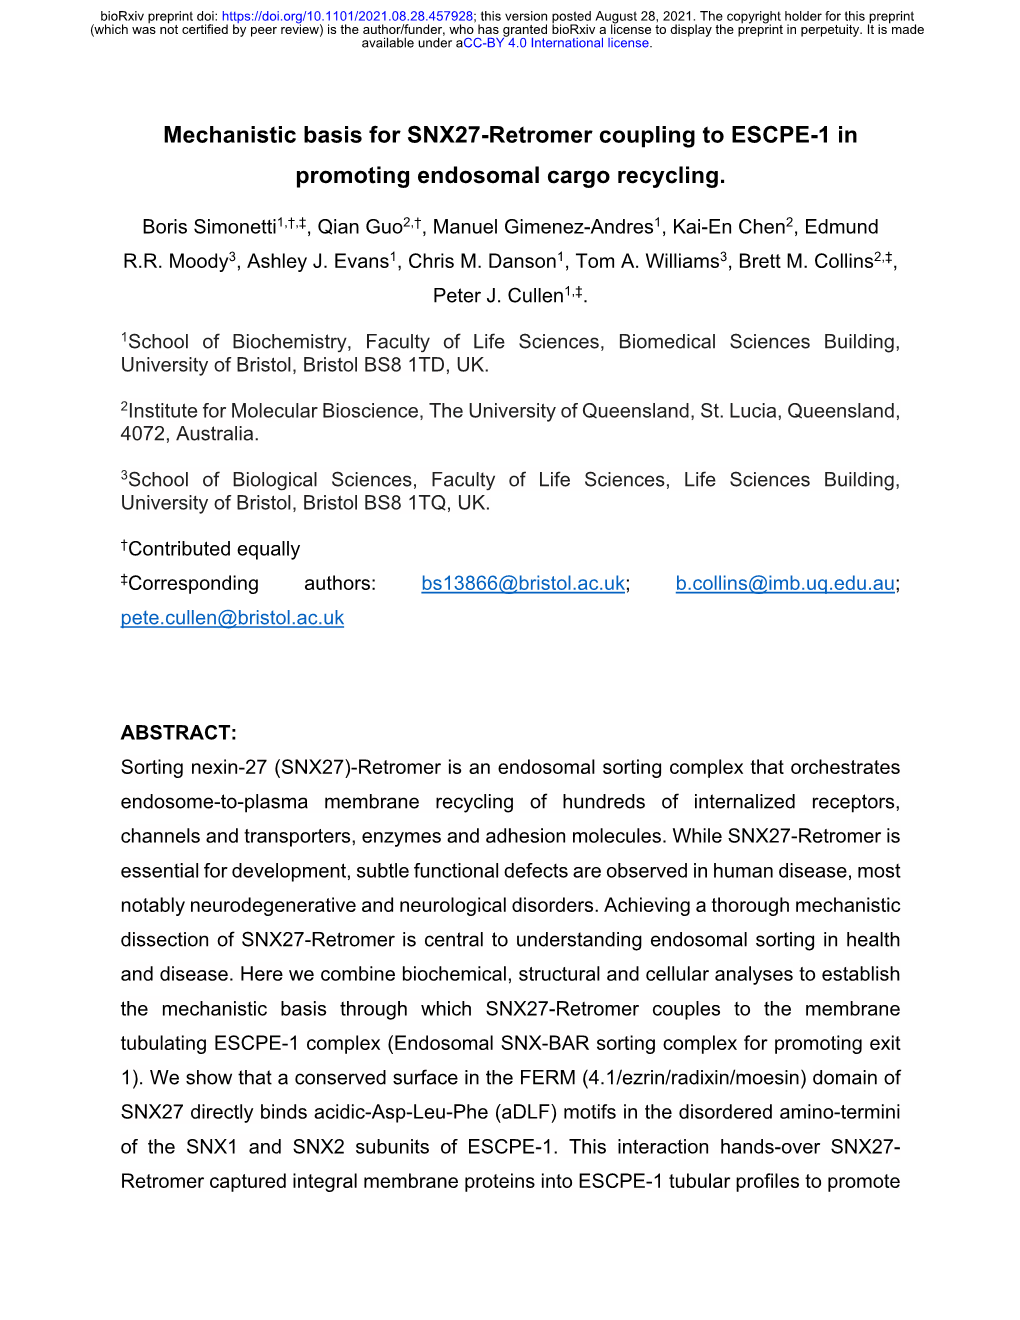 Mechanistic Basis for SNX27-Retromer Coupling to ESCPE-1 in Promoting Endosomal Cargo Recycling